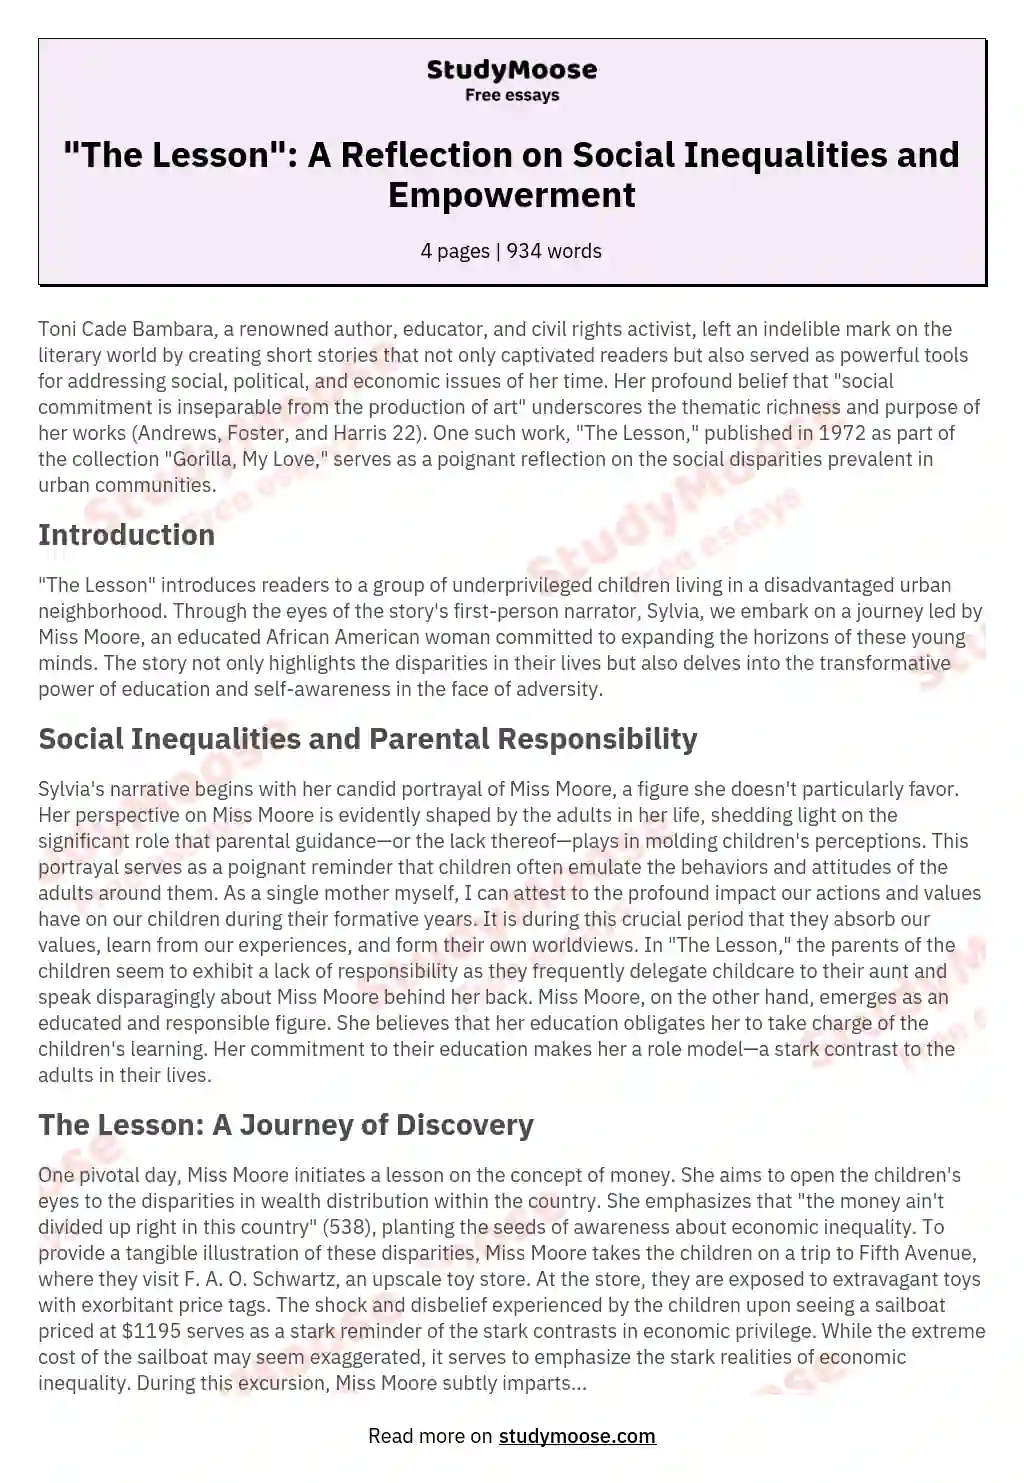 "The Lesson": A Reflection on Social Inequalities and Empowerment essay